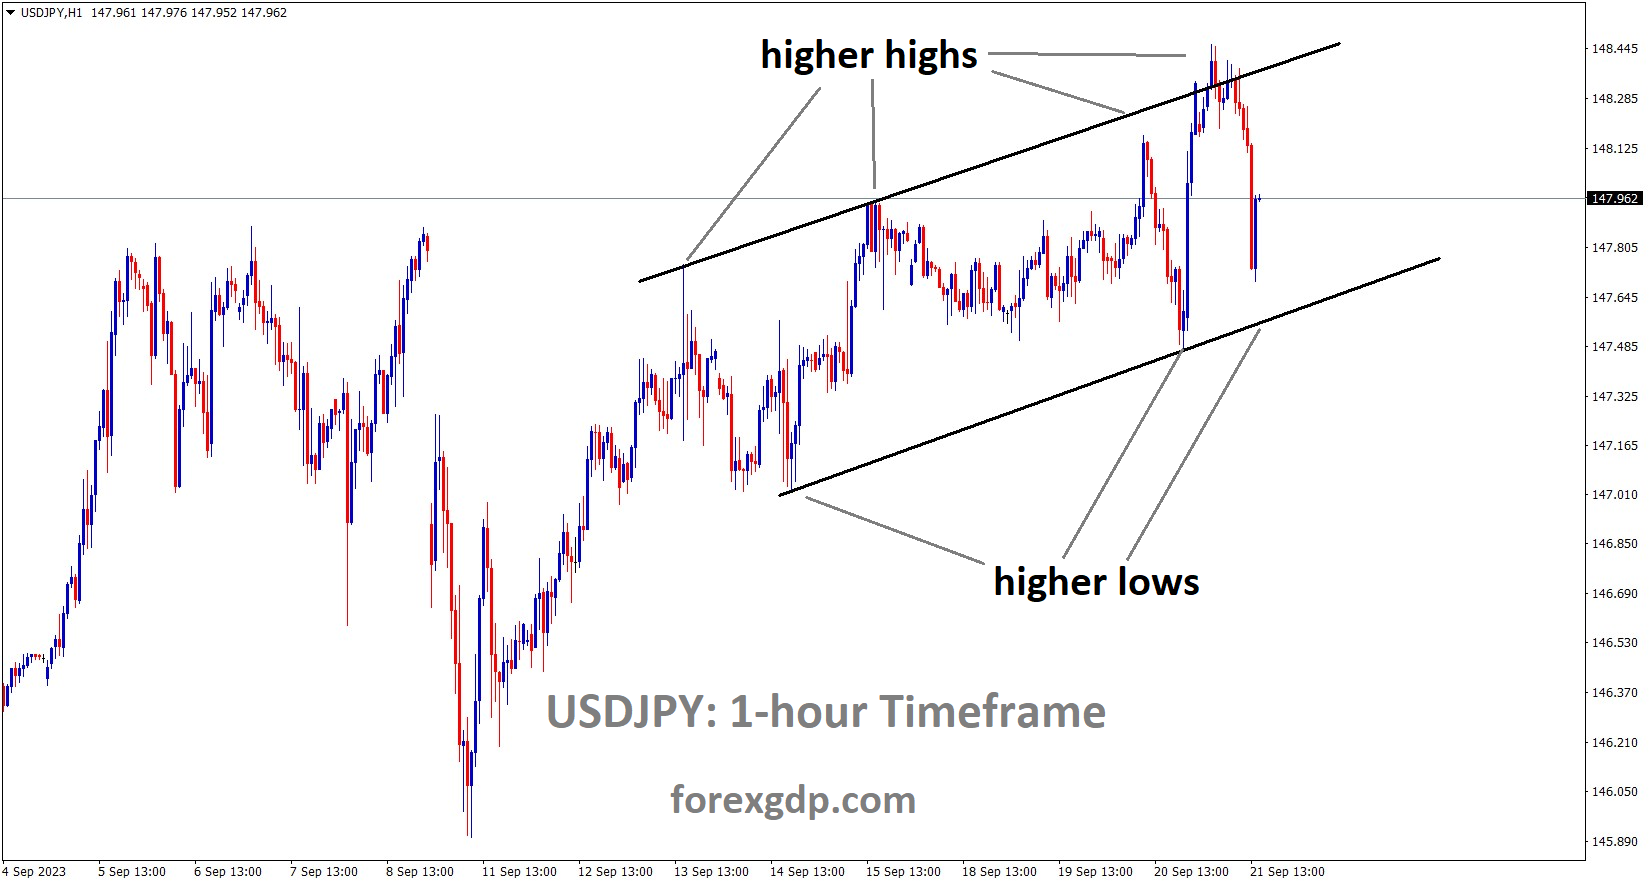 USDJPY is moving in an Ascending channel and the market has reached the higher low area of the channel